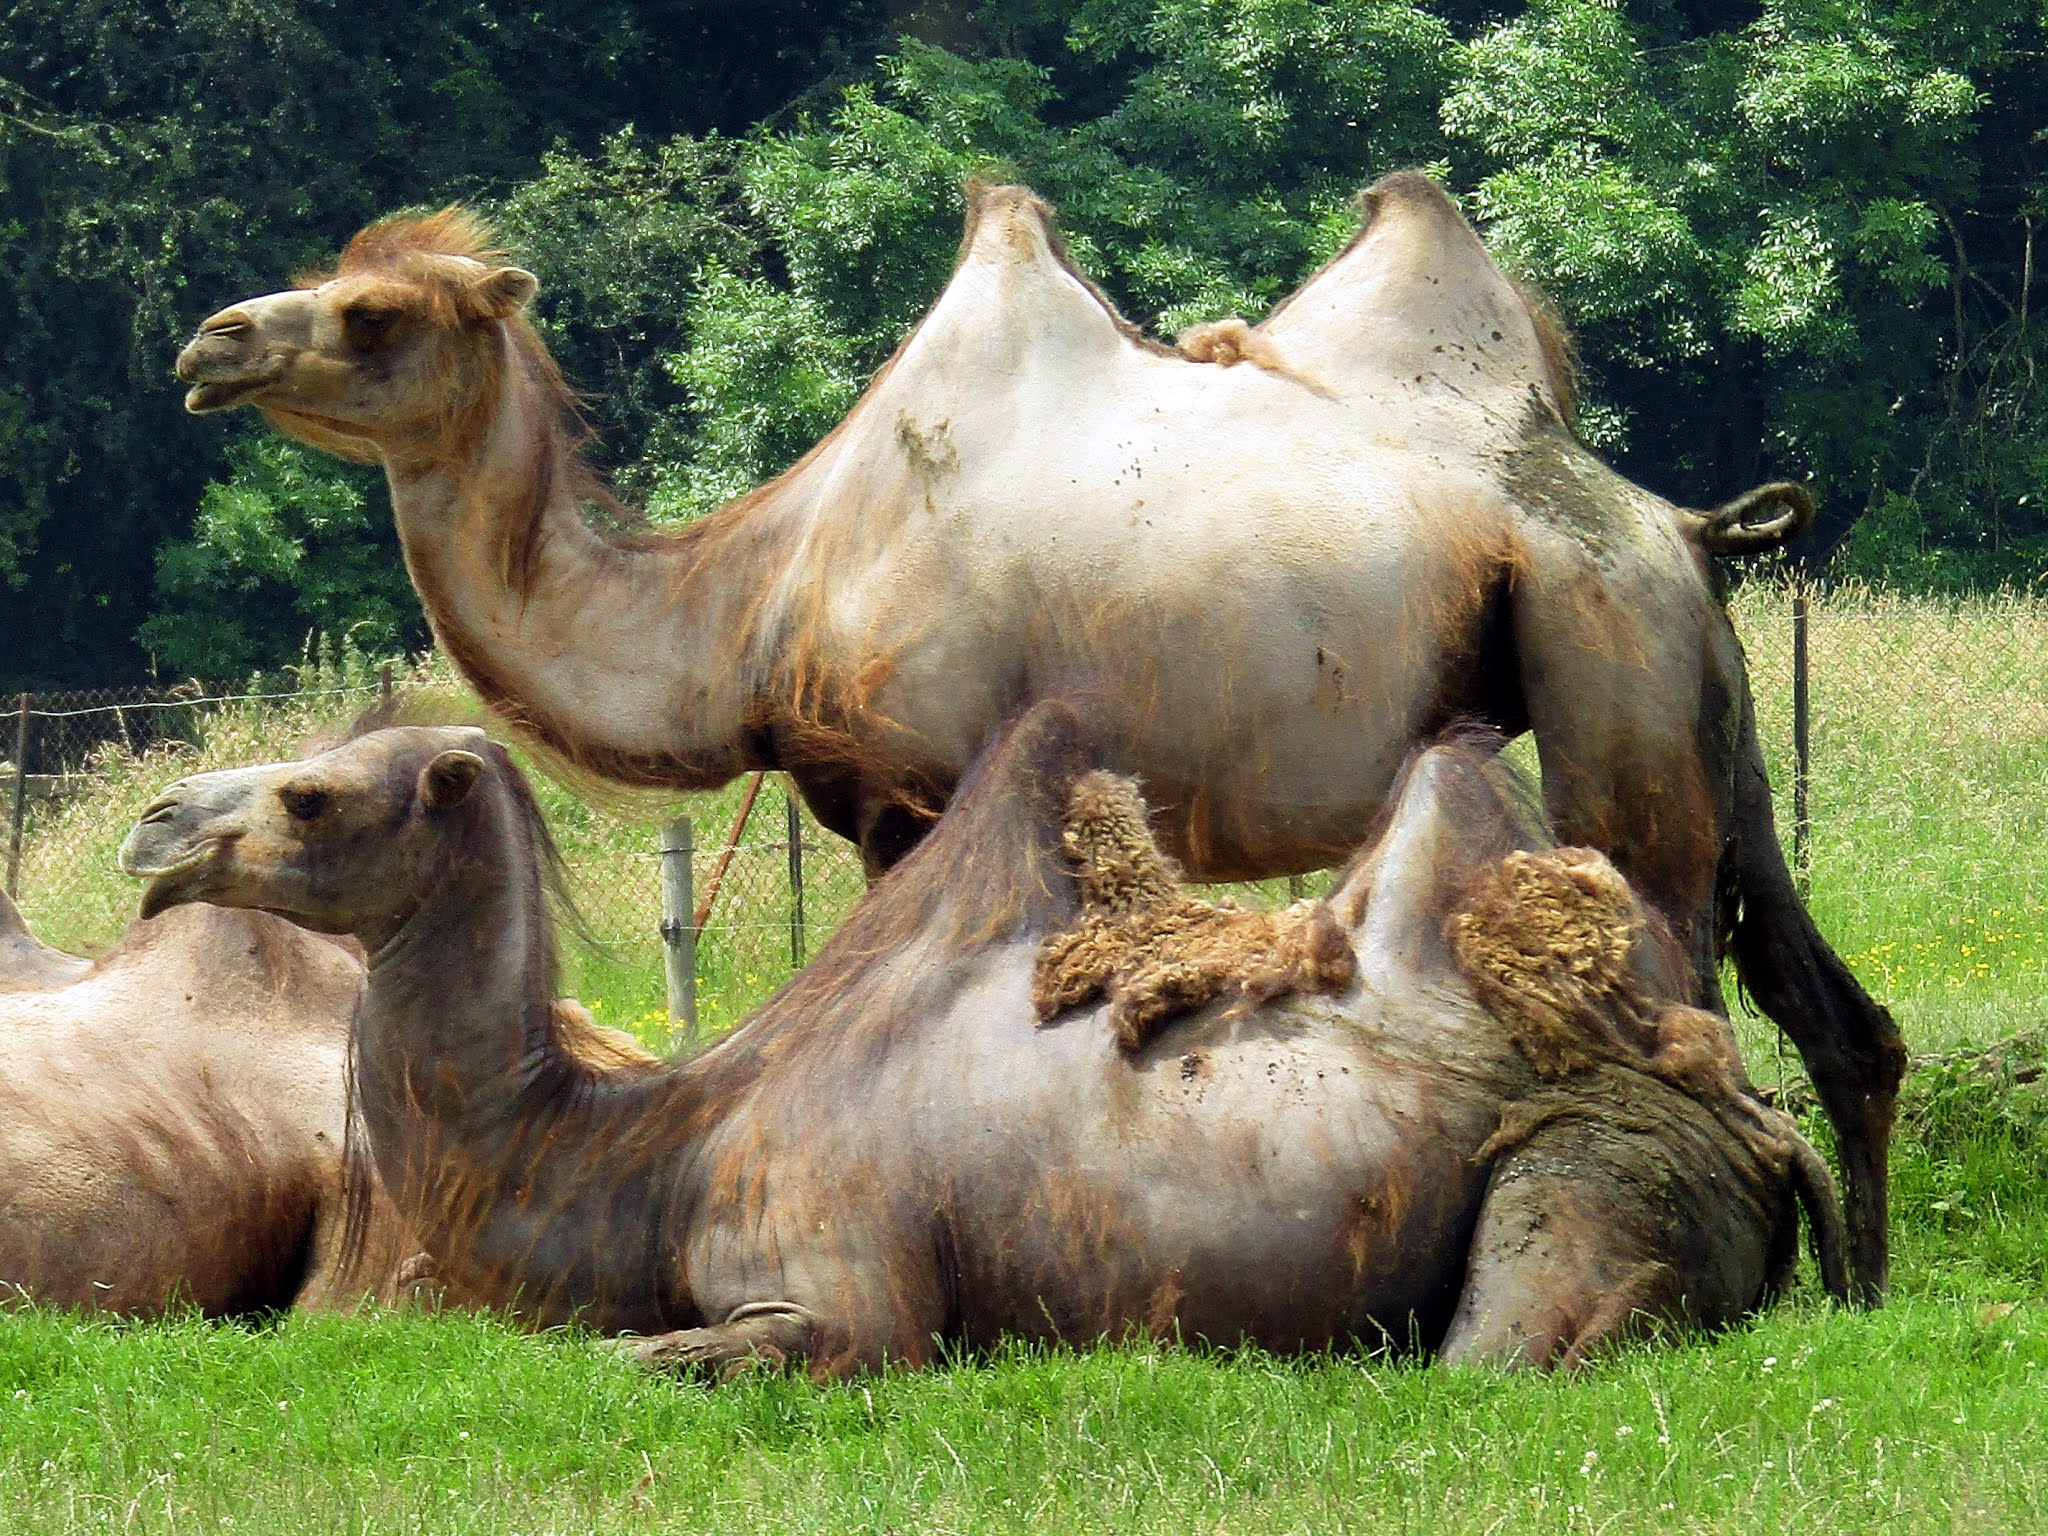 A photo of two Bactrian camels at Whipsnade Zoo.